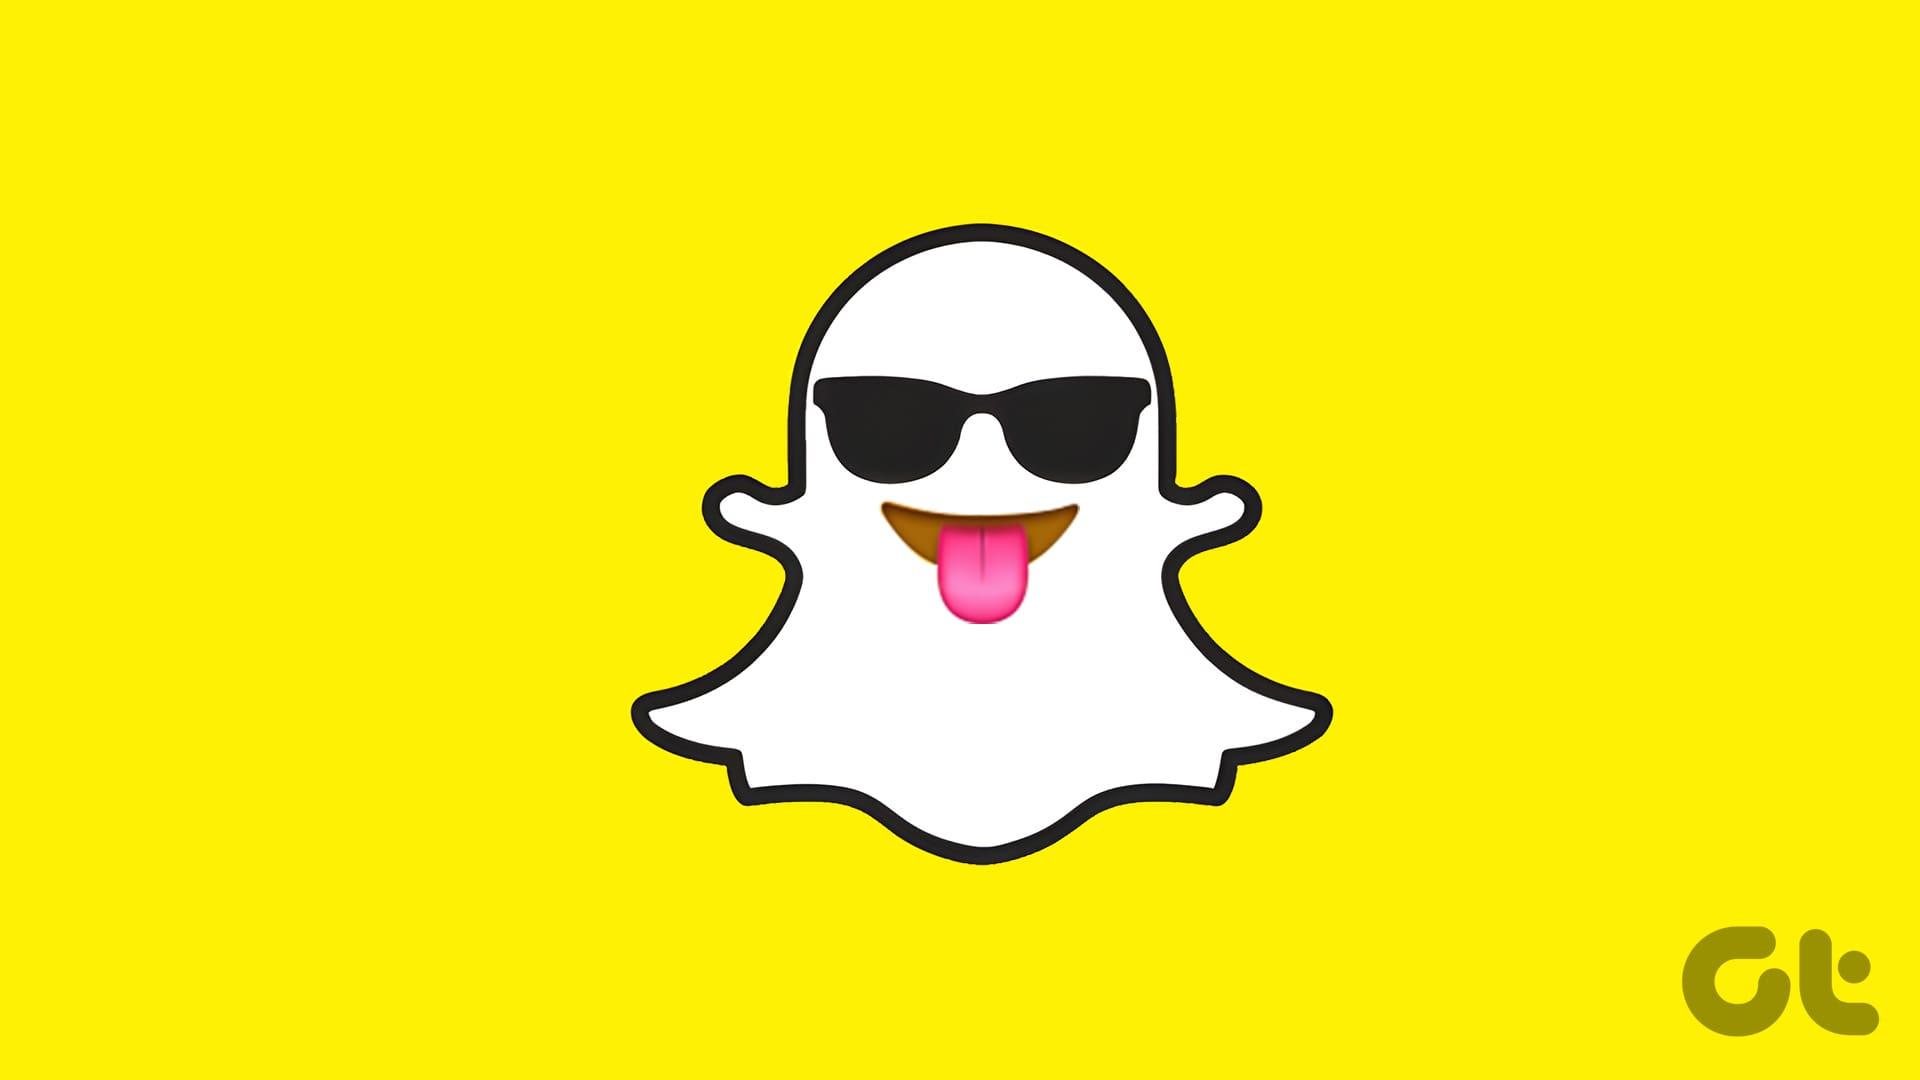 How to Make a Private Story on Snapchat